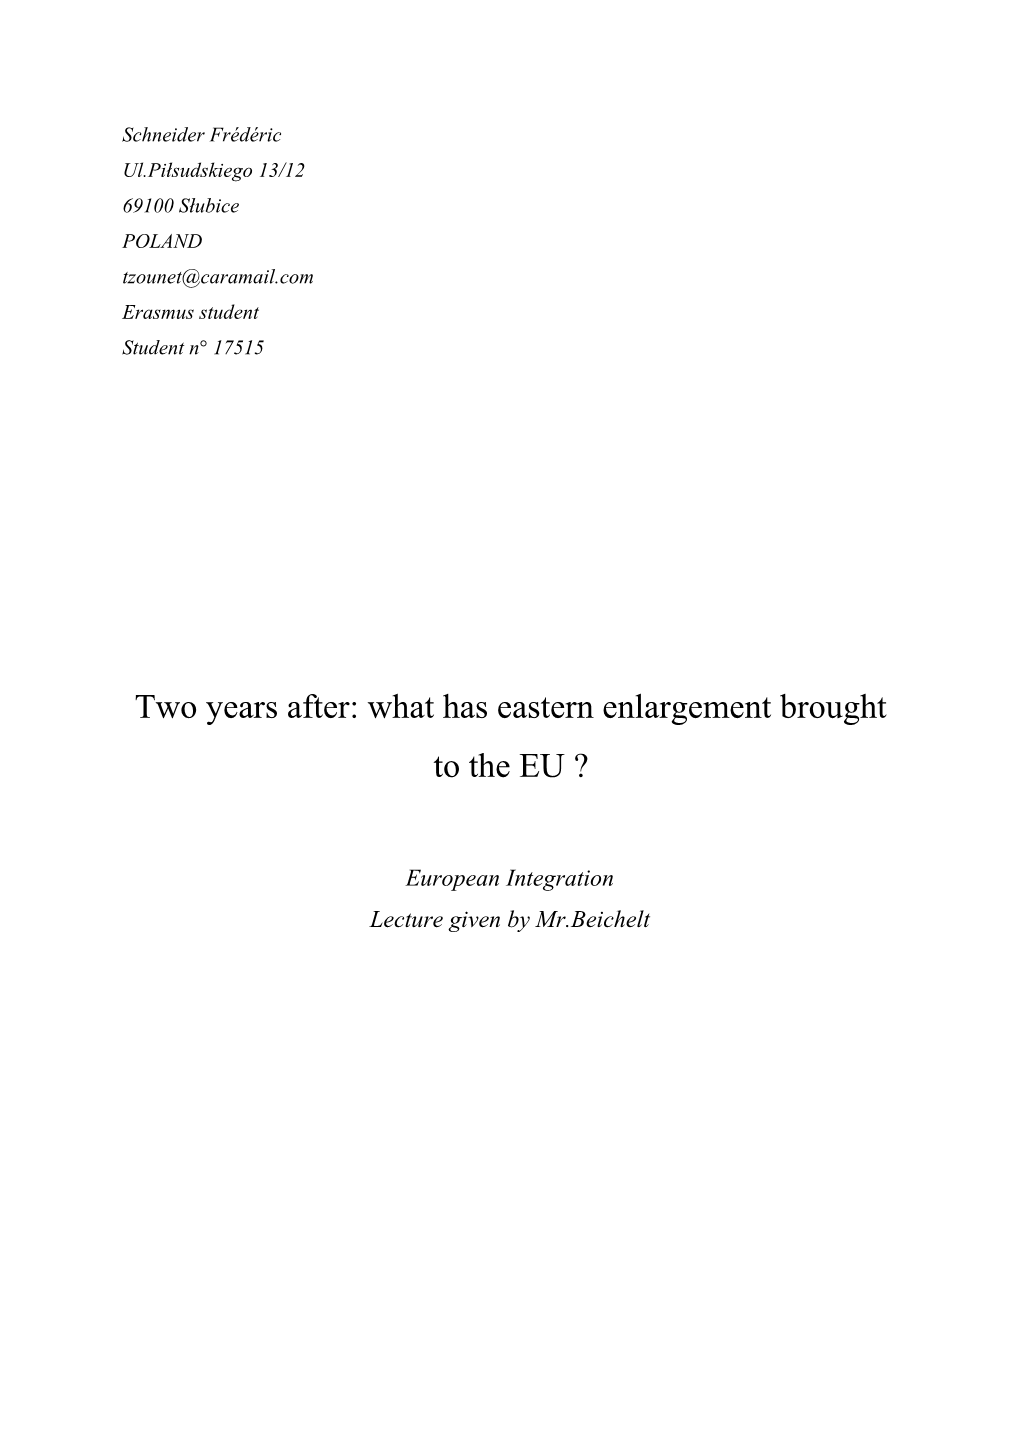 Two Years After : What Has Eastern Enlargement Brought to the EU